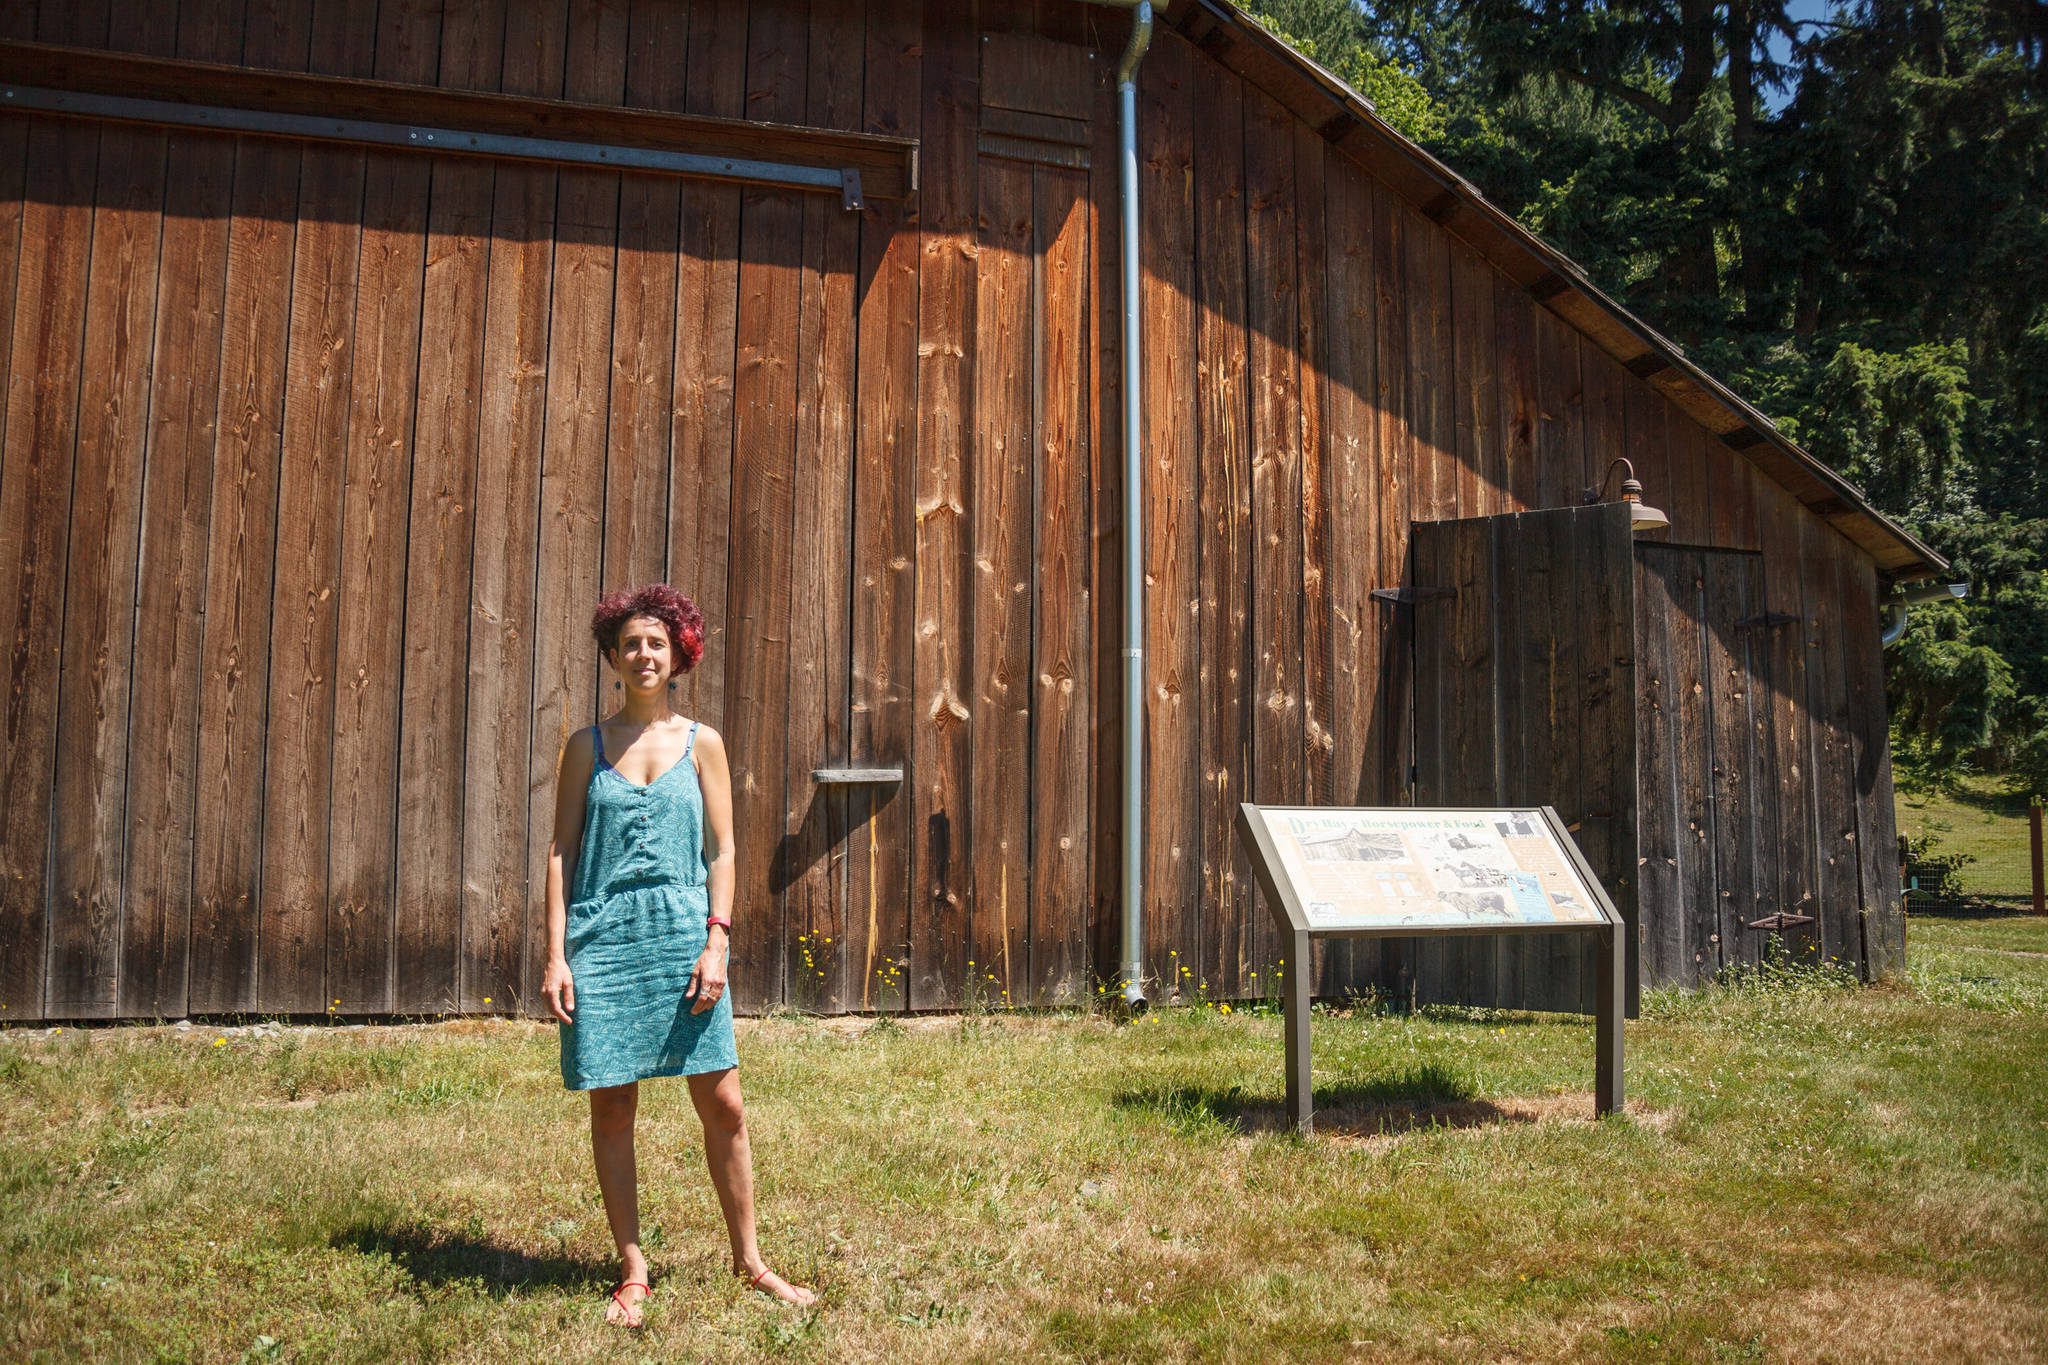 Artist in residence Neely Goniodsky poses for a photo outside of the barn she is working out of at Mary Olson Farm on Friday, June 25, 2021. The farm is located at 28728 Green River Road. Photo By Henry Stewart-Wood/Auburn Reporter